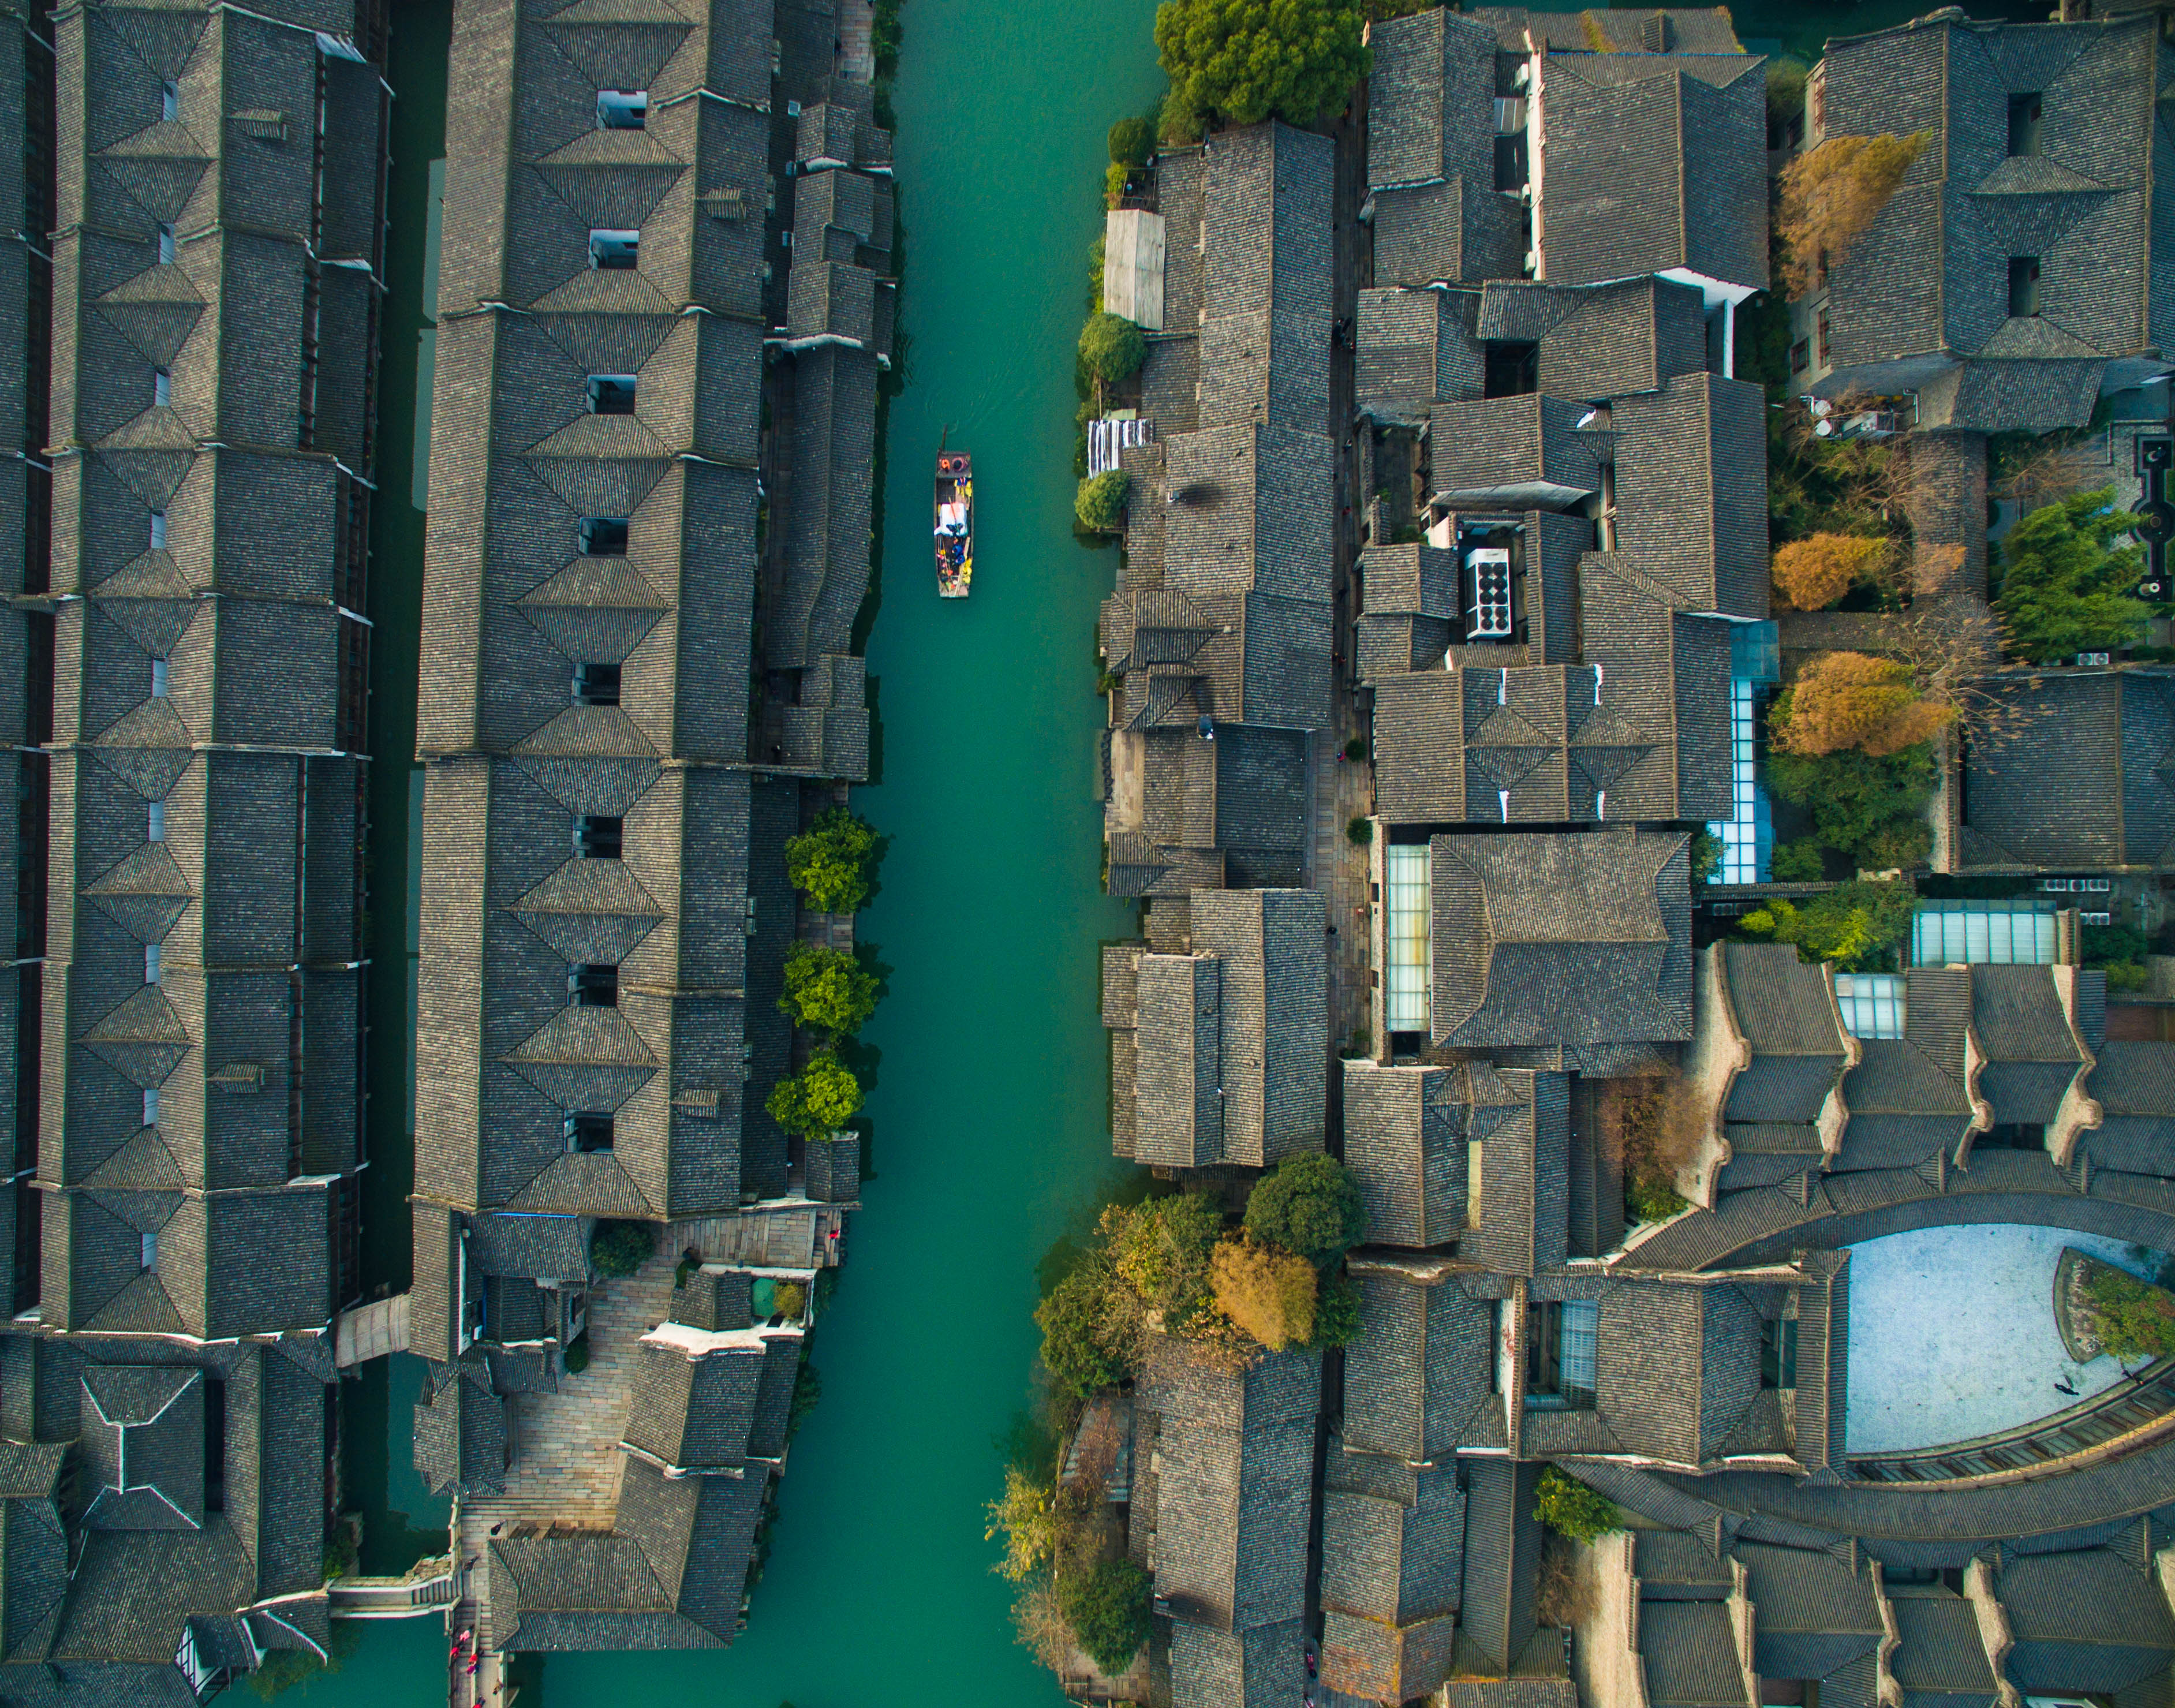 (151213) -- BEIJING, Dec. 13, 2015 (Xinhua) -- An aerial photo taken on Dec. 7, 2015 shows the scenery of Wuzhen Township, a town city for the World Internet Conference, east China's Zhejiang Province. The World Internet Conference will be held in Wuzhen from Dec. 16 to 18. (Xinhua/Xu Yu) 